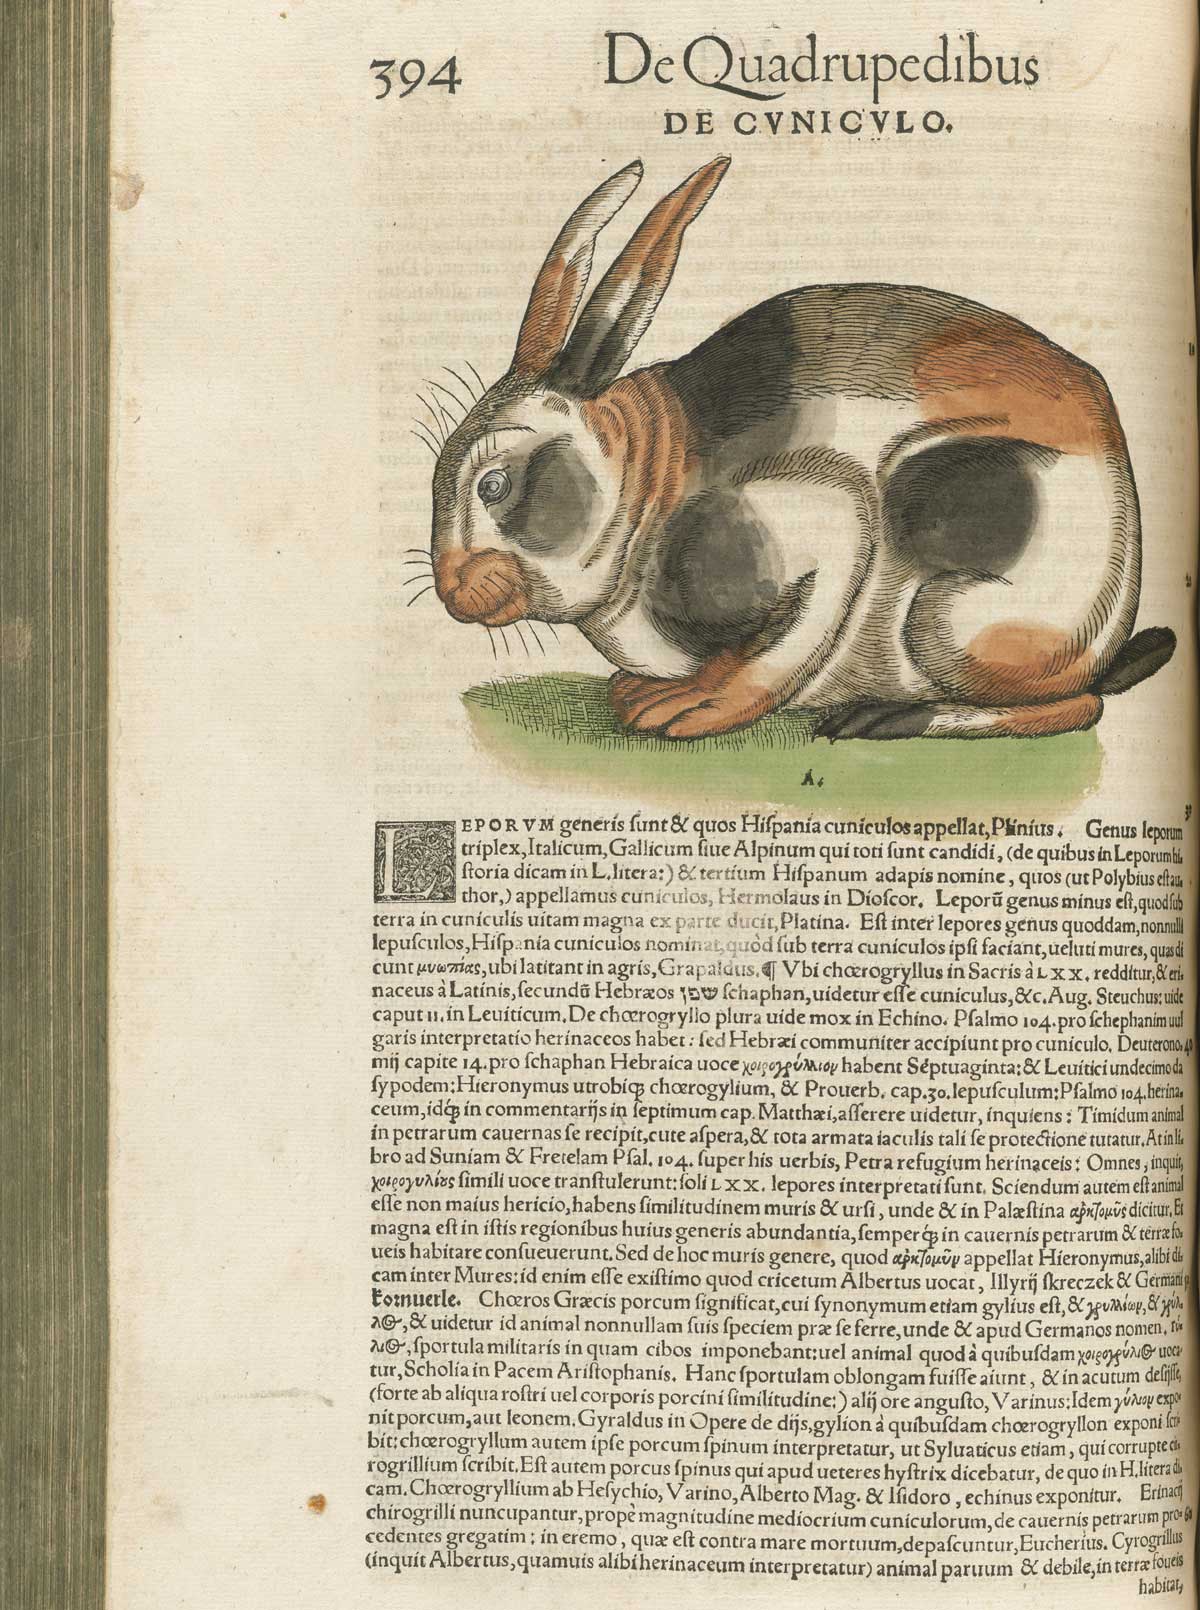 Page 394 from volume 1 of Conrad Gessner's Conradi Gesneri medici Tigurini Historiae animalium, featuring the colored woodcut of de cuniculo or black, brown and white spotted rabbit.